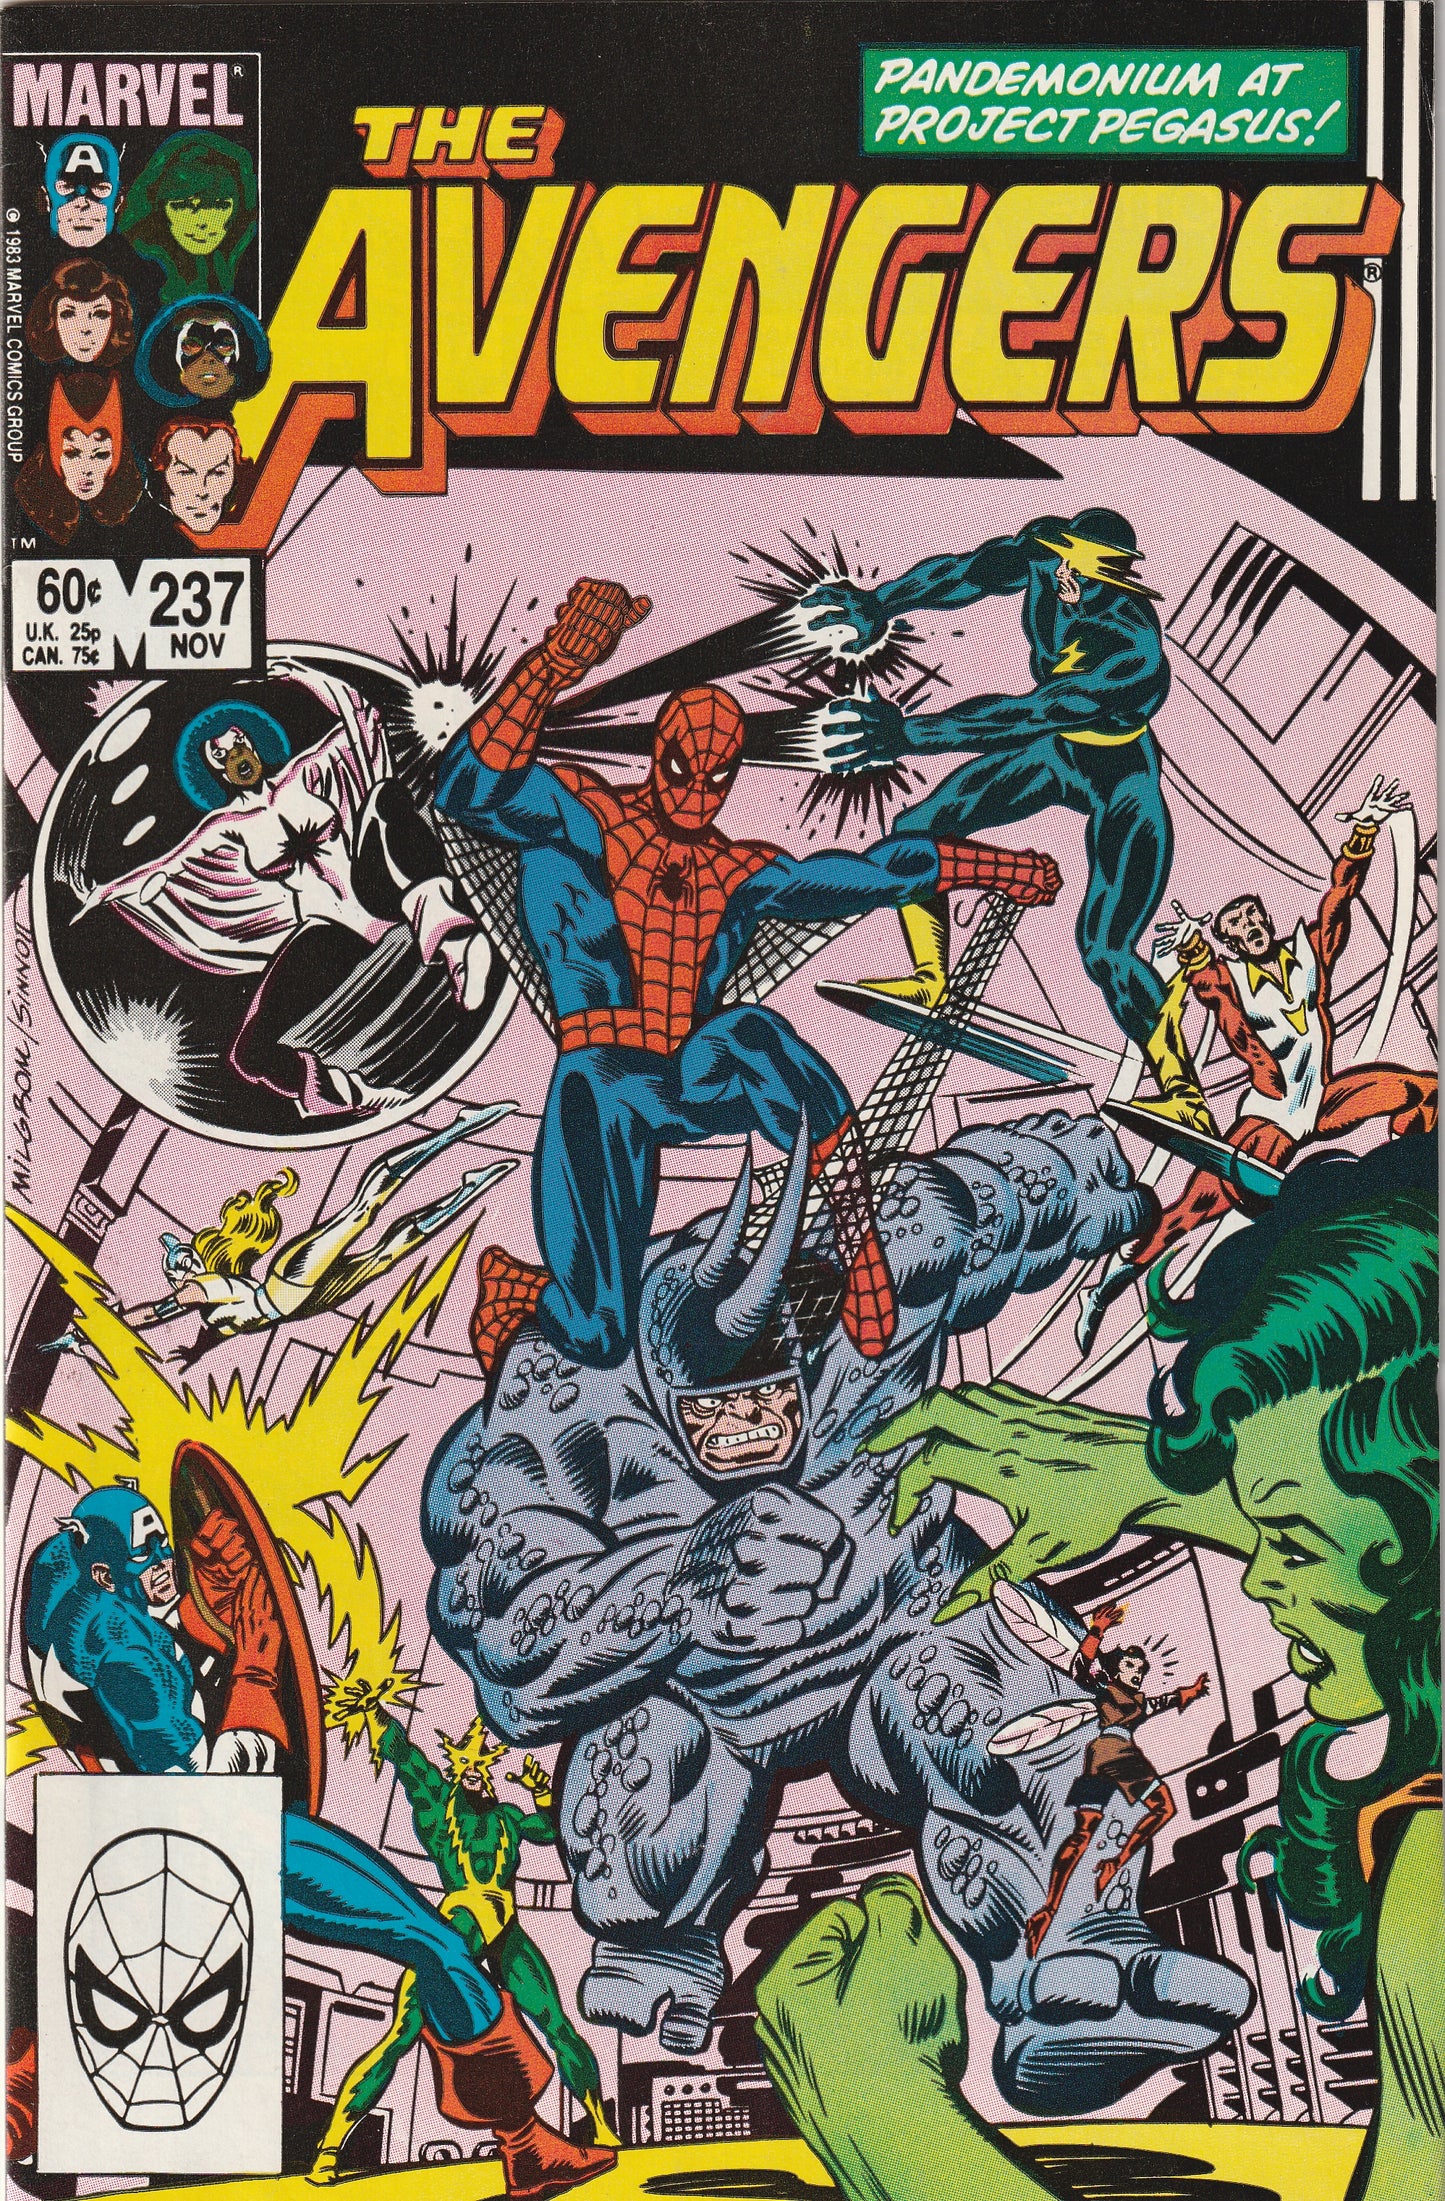 Avengers #237 (1983) - Spider-Man tries to join the Avengers